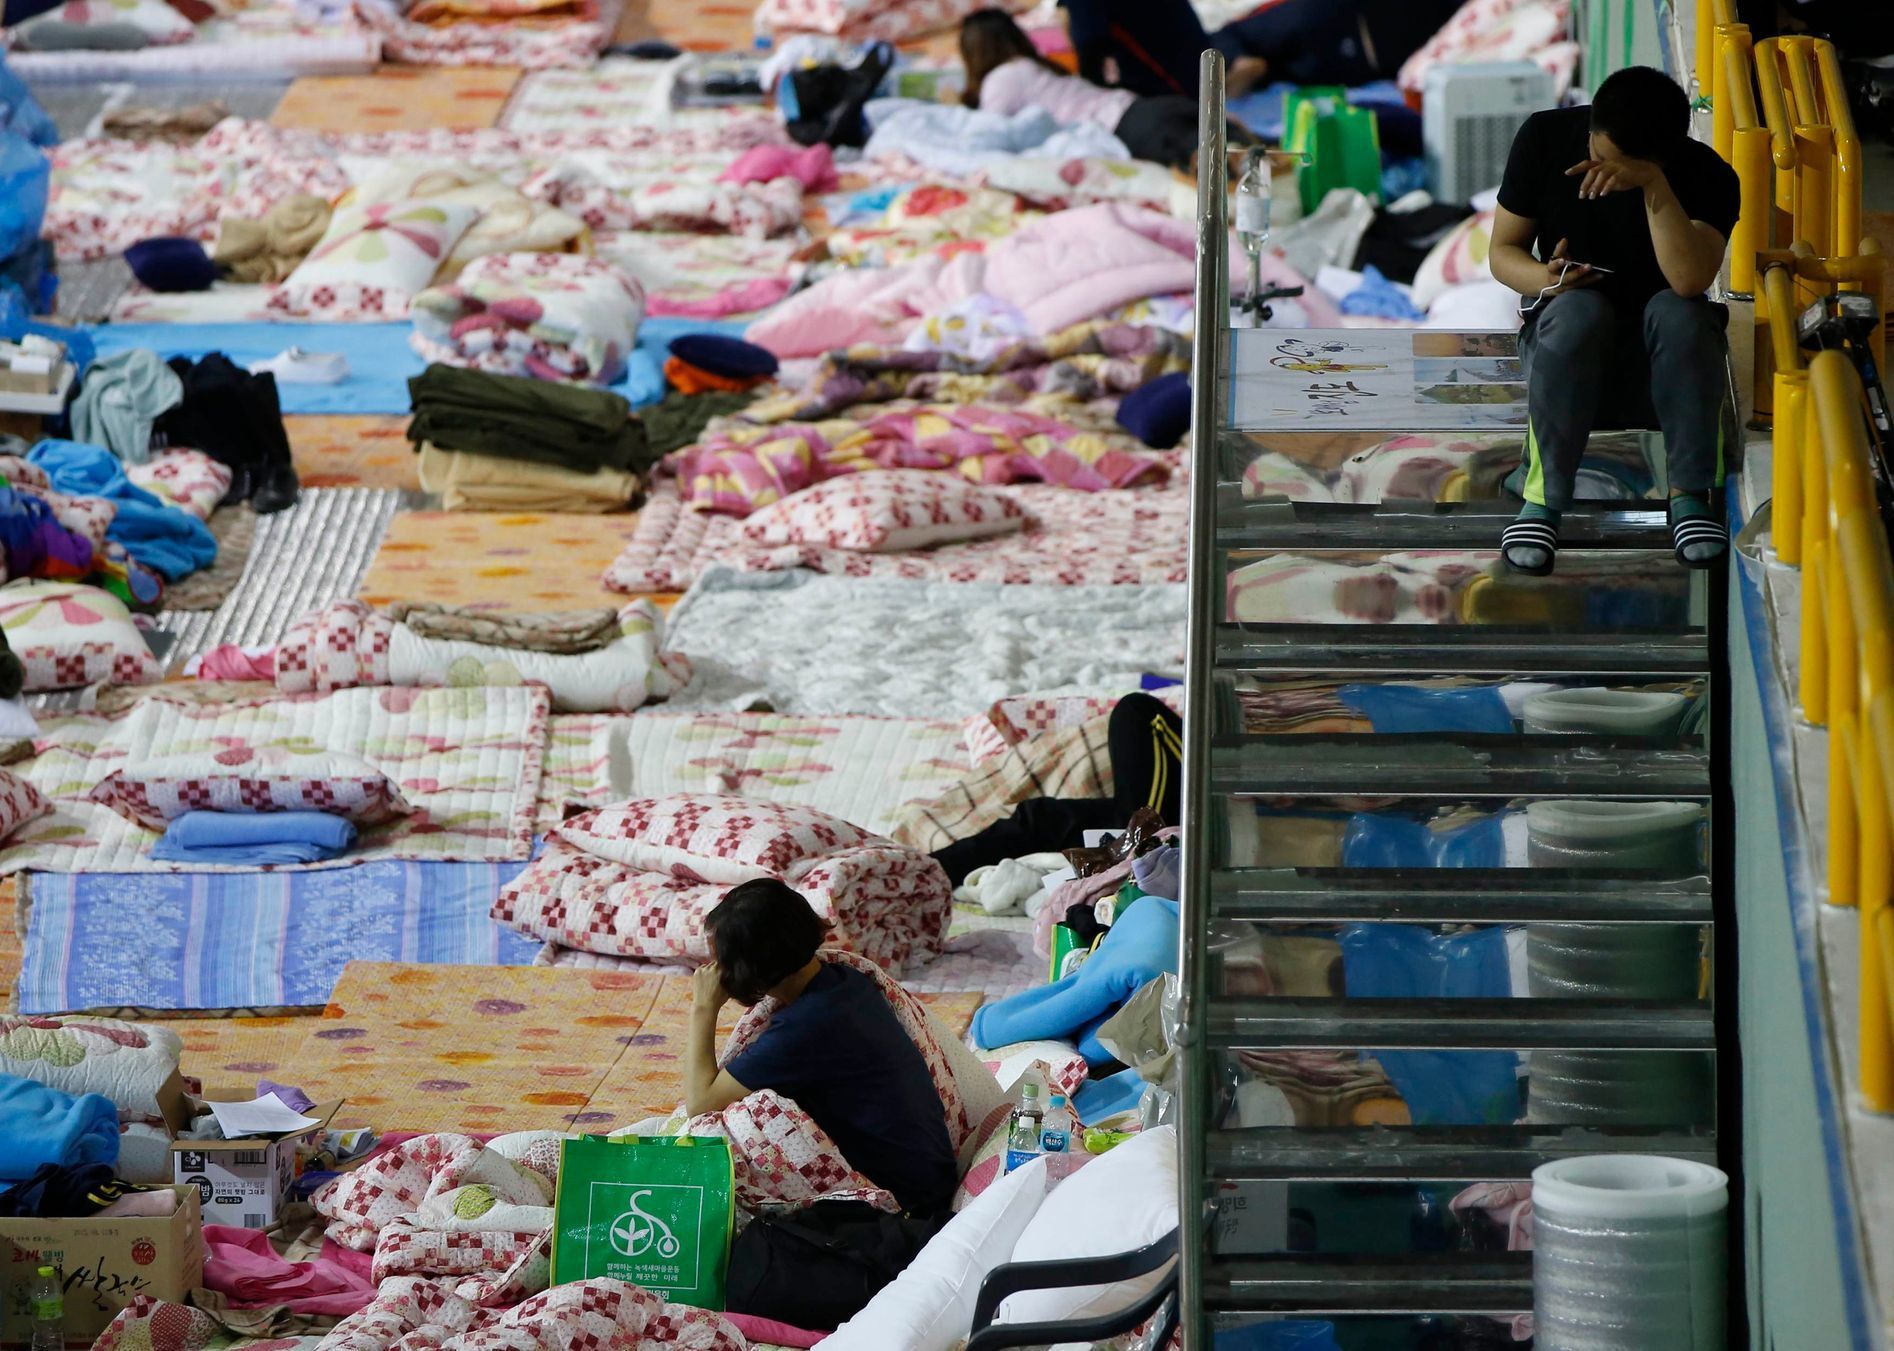 Family members of a missing passenger on board the capsized South Korean ferry Sewol rest as they wait for news from rescue and salvage teams in a makeshift accommodation at a gymnasium in the port ci